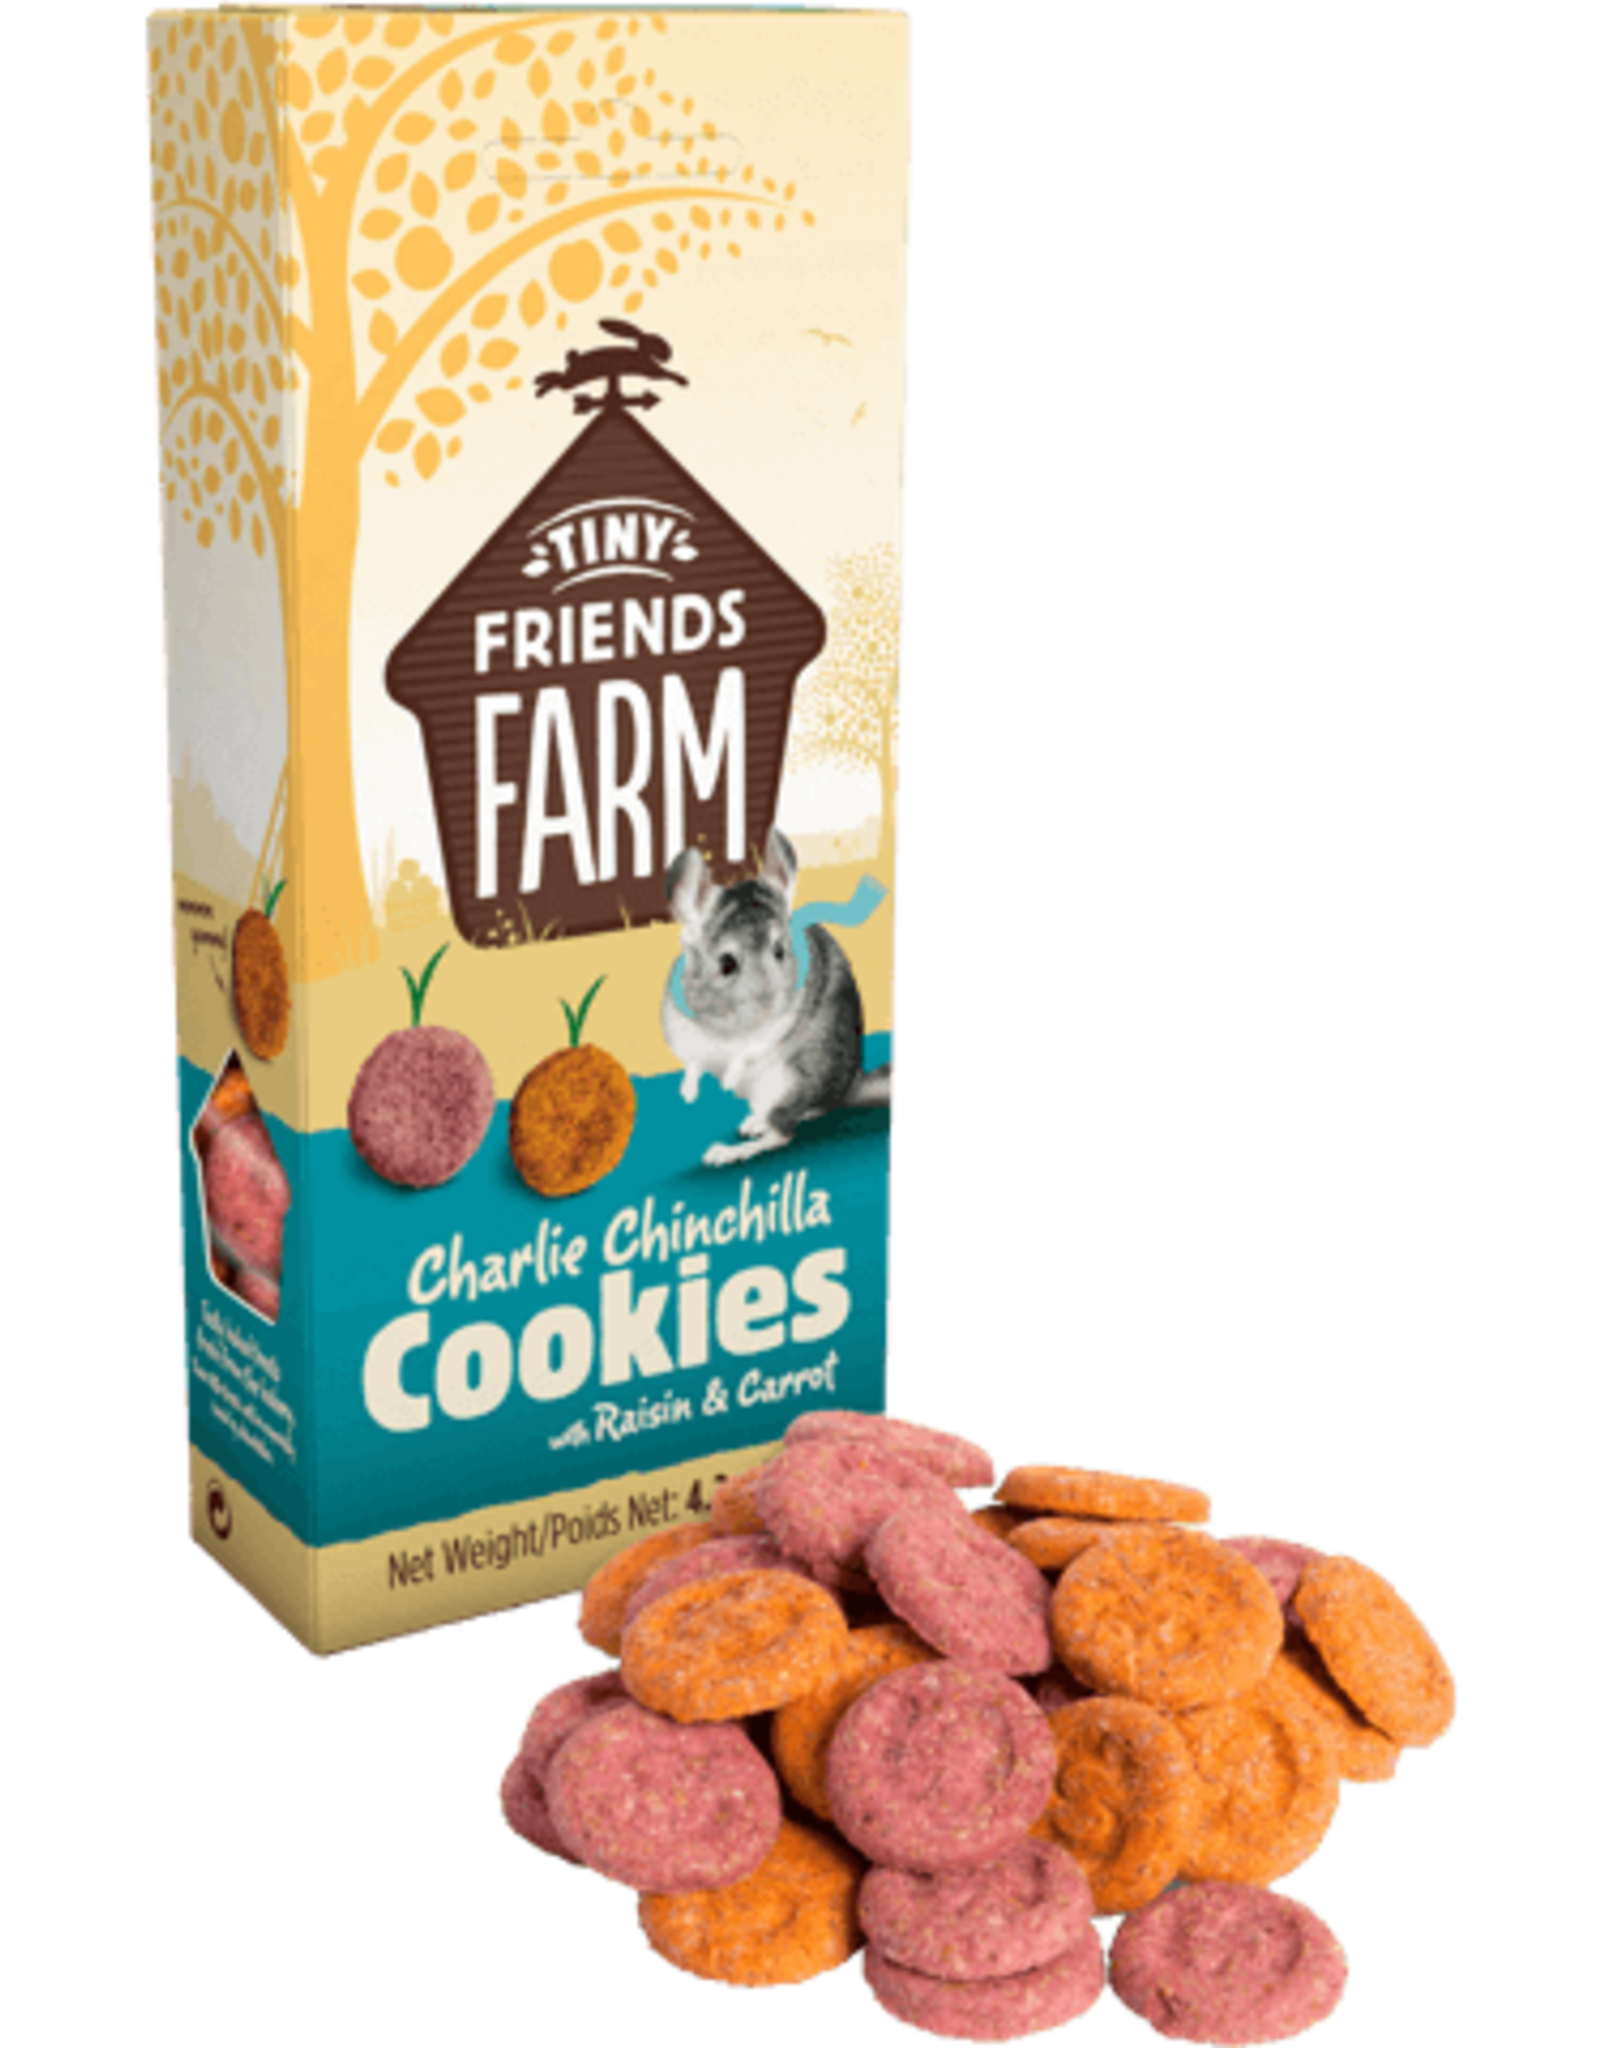 Supreme Pet Foods TINY FRIENDS FARM Charlie Chinchilla Cookie 120gs with Raisin & Carrot